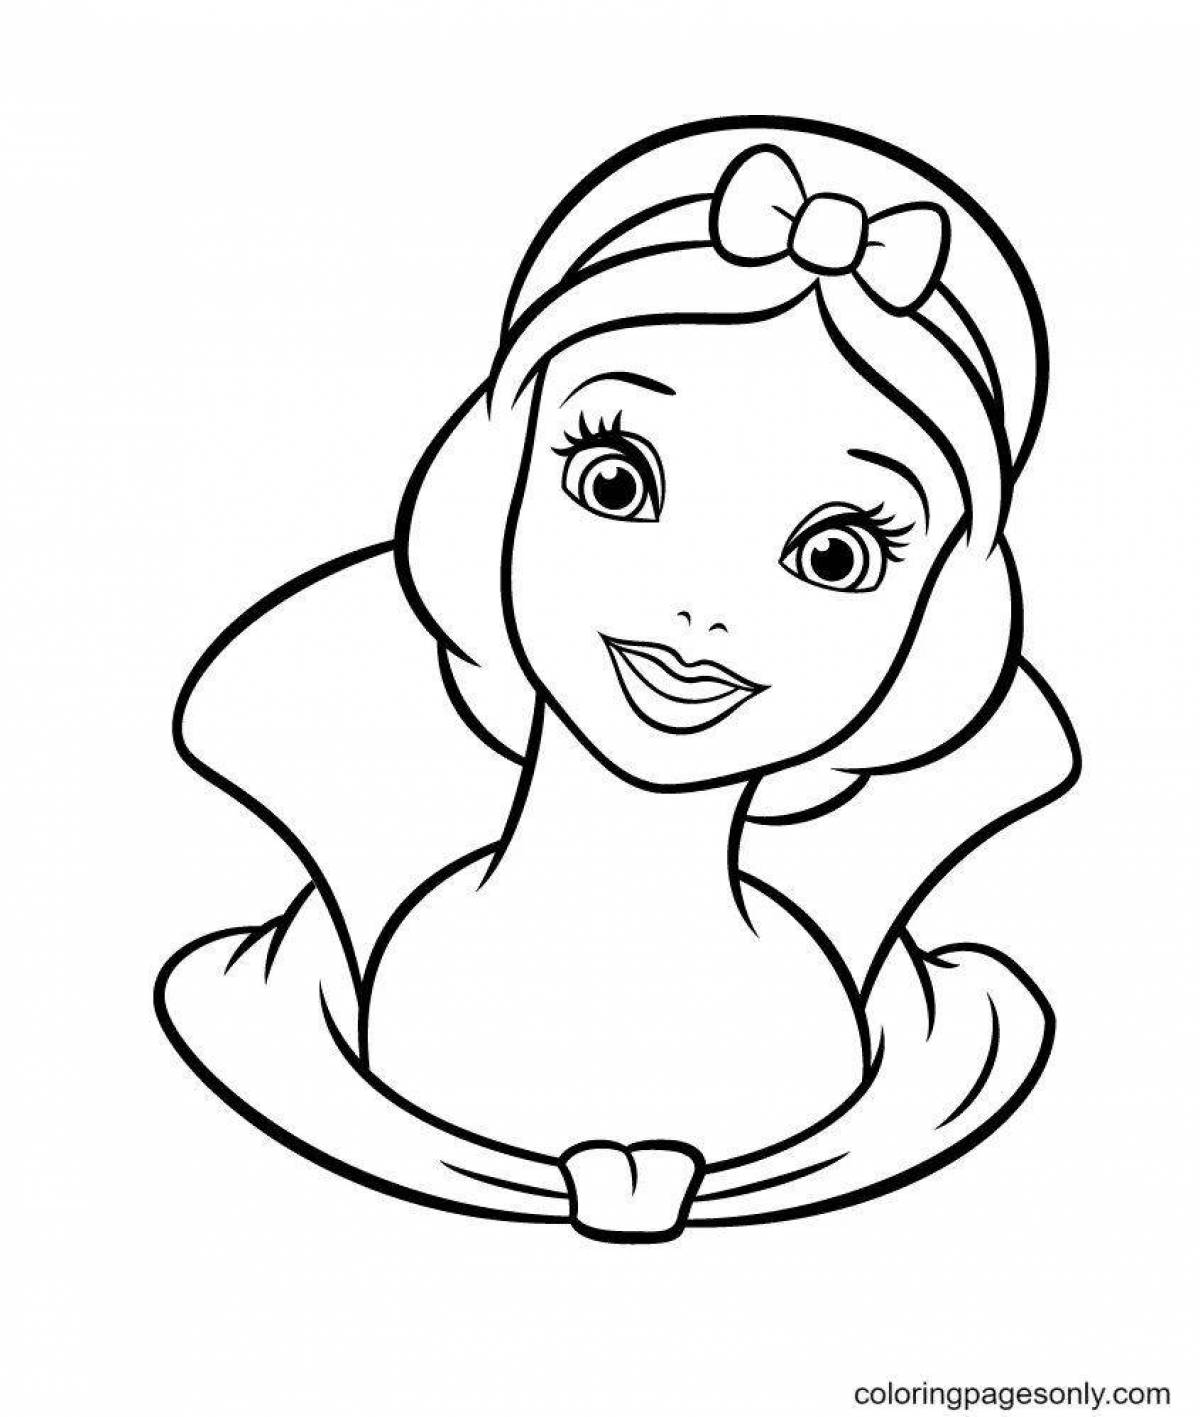 Refined port coloring page